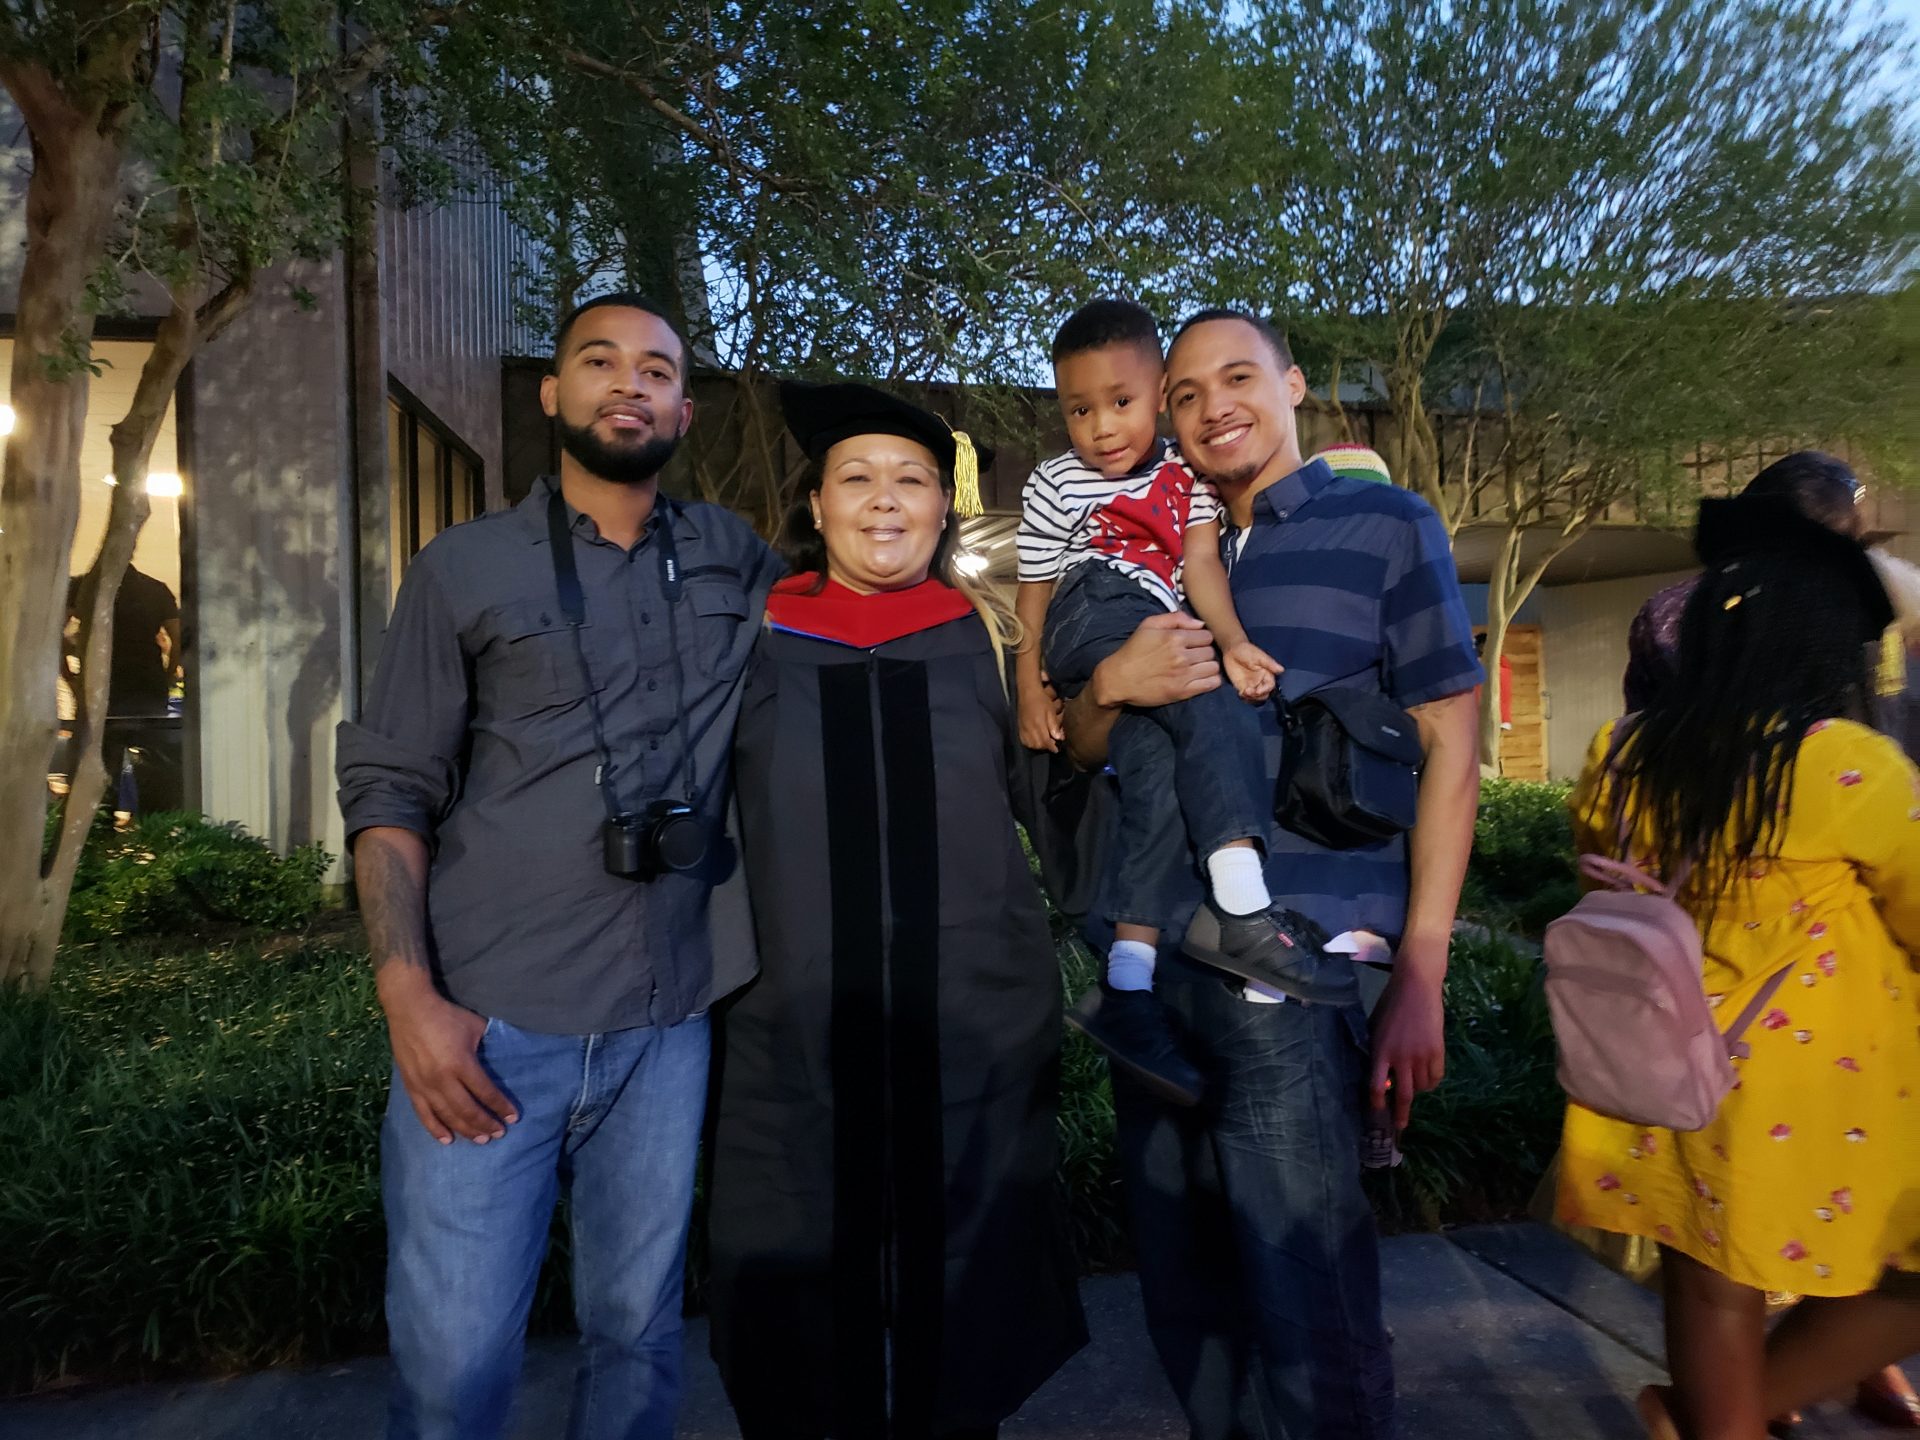 Mommy because of you I dared and succeeded  to become  Dr. Anna Arce, and because of you my children and grandchildren will strive and reach even higher heights. You are our strength and you will live on in us.  We love you so dearly.